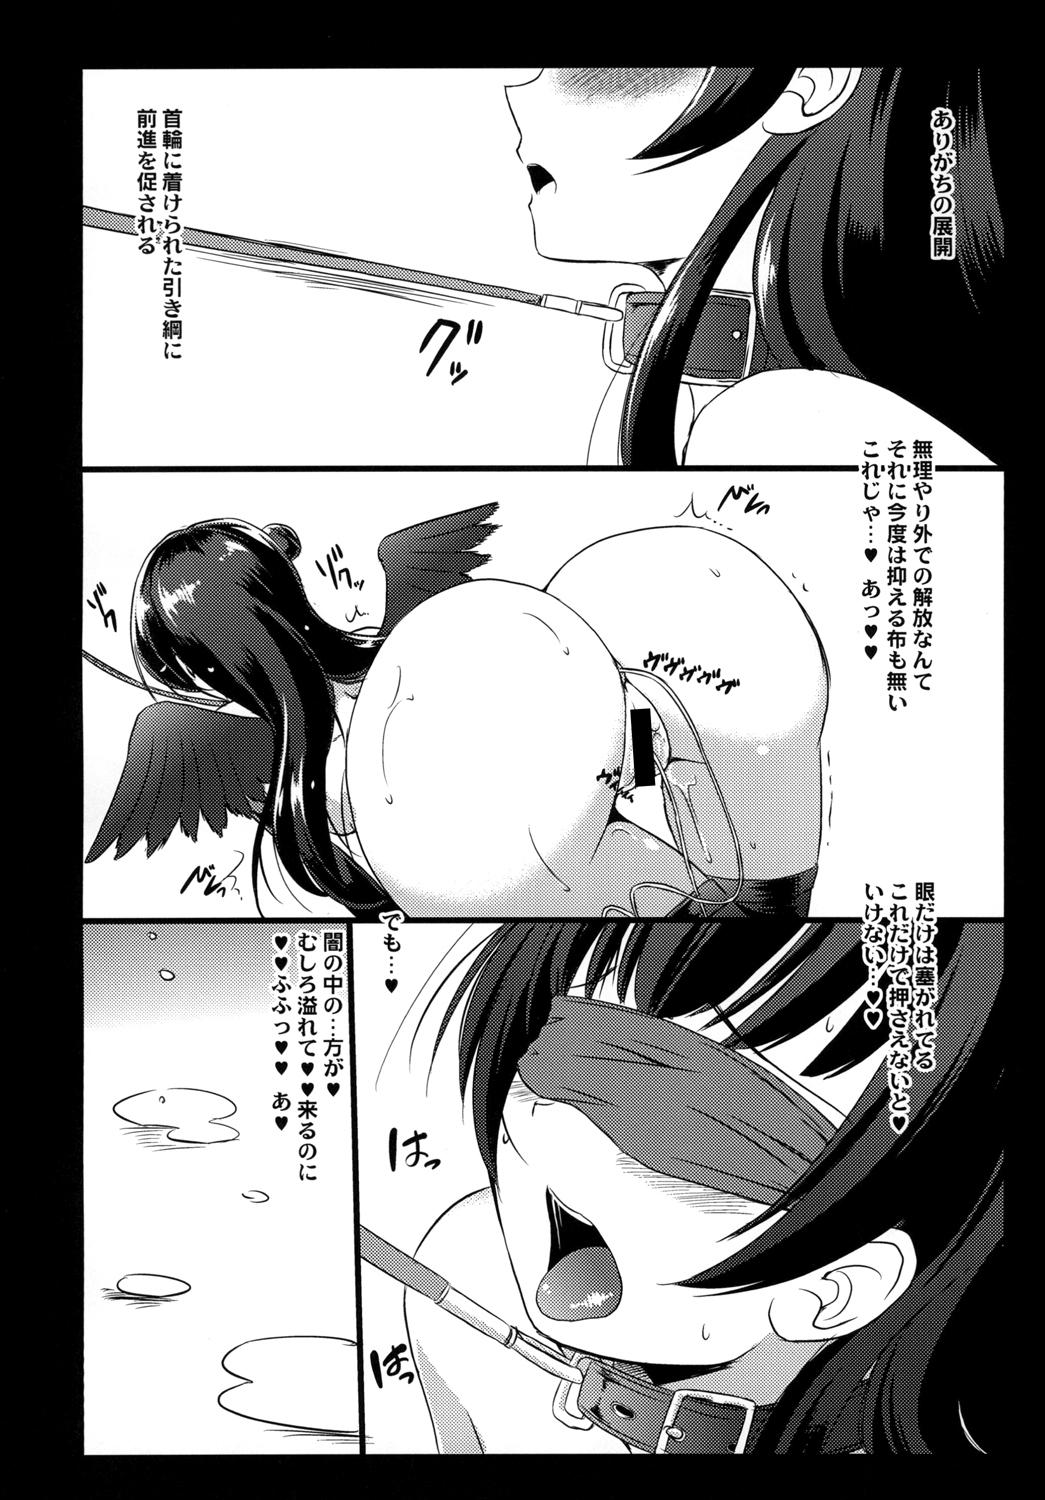 Motel LL-SO3 - Love live sunshine Gay Party - Page 10